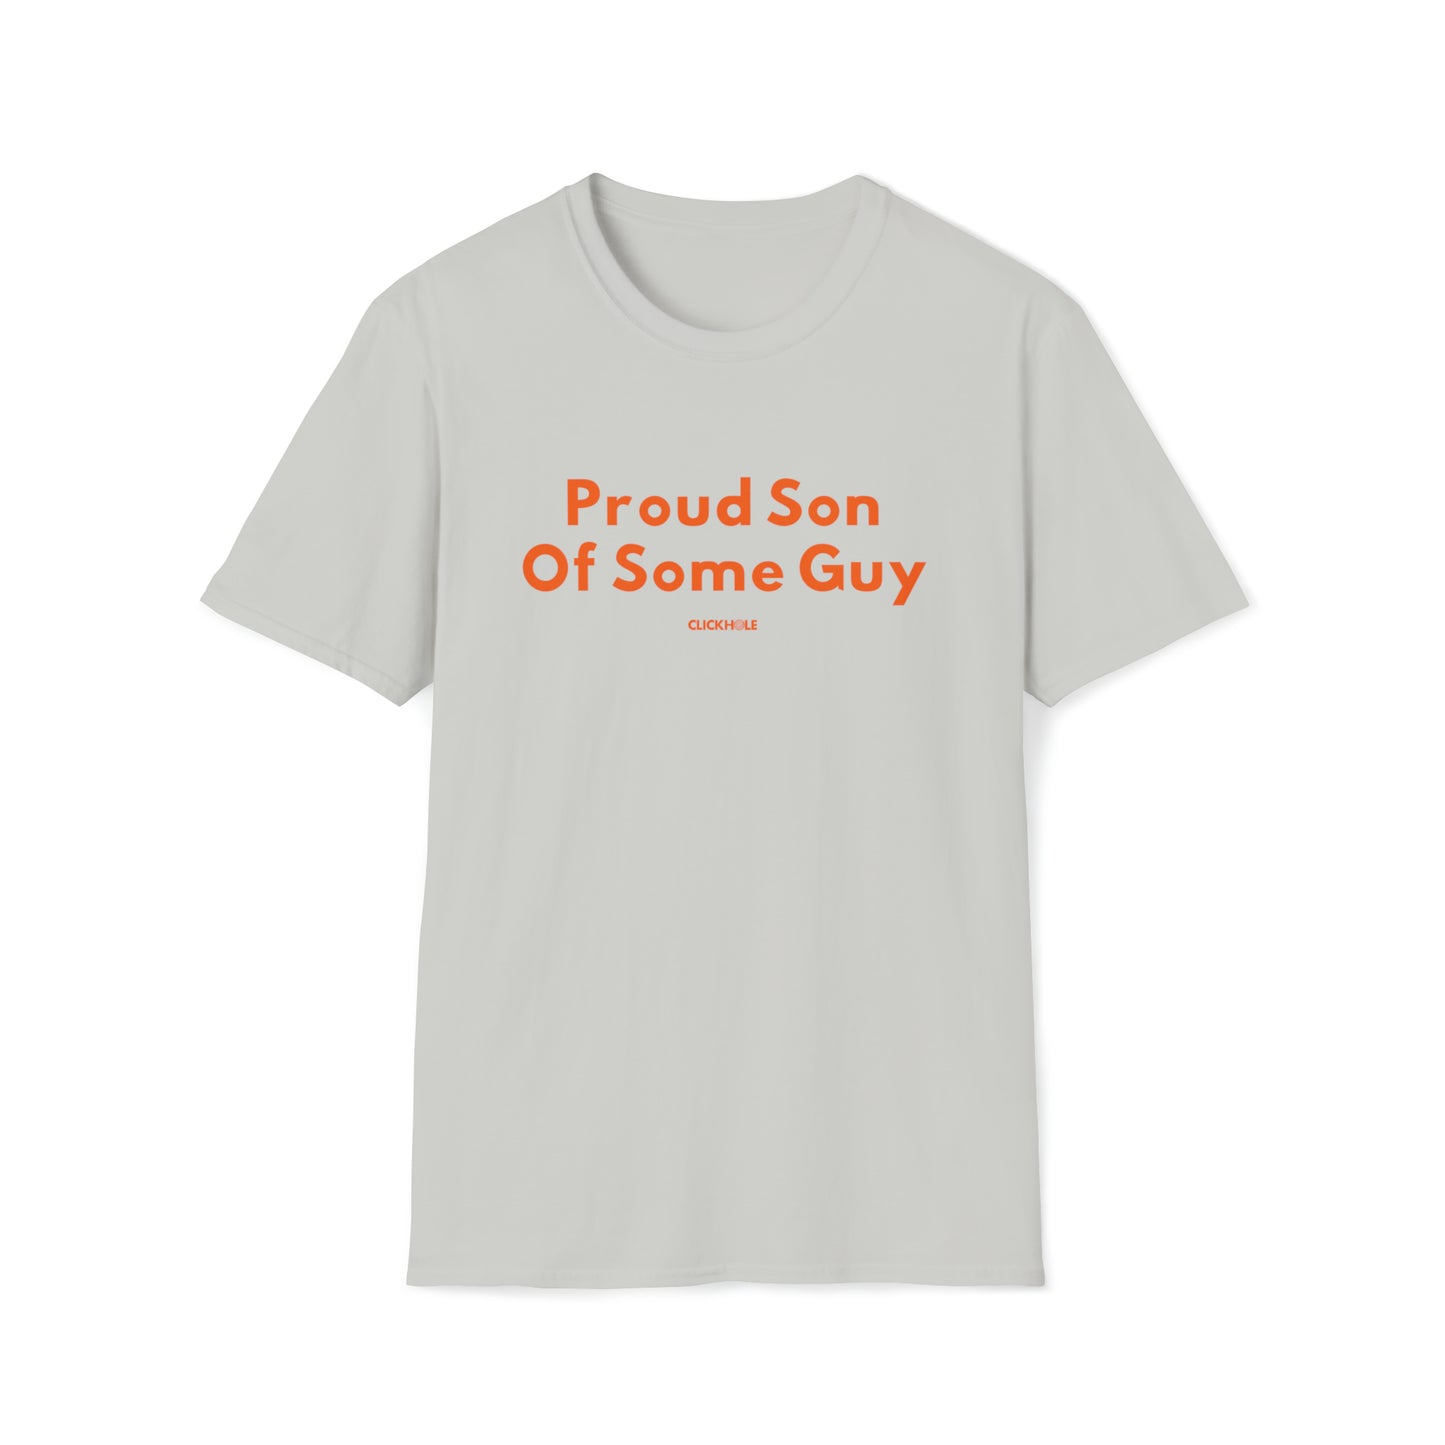 "Proud Son Of Some Guy" Shirt